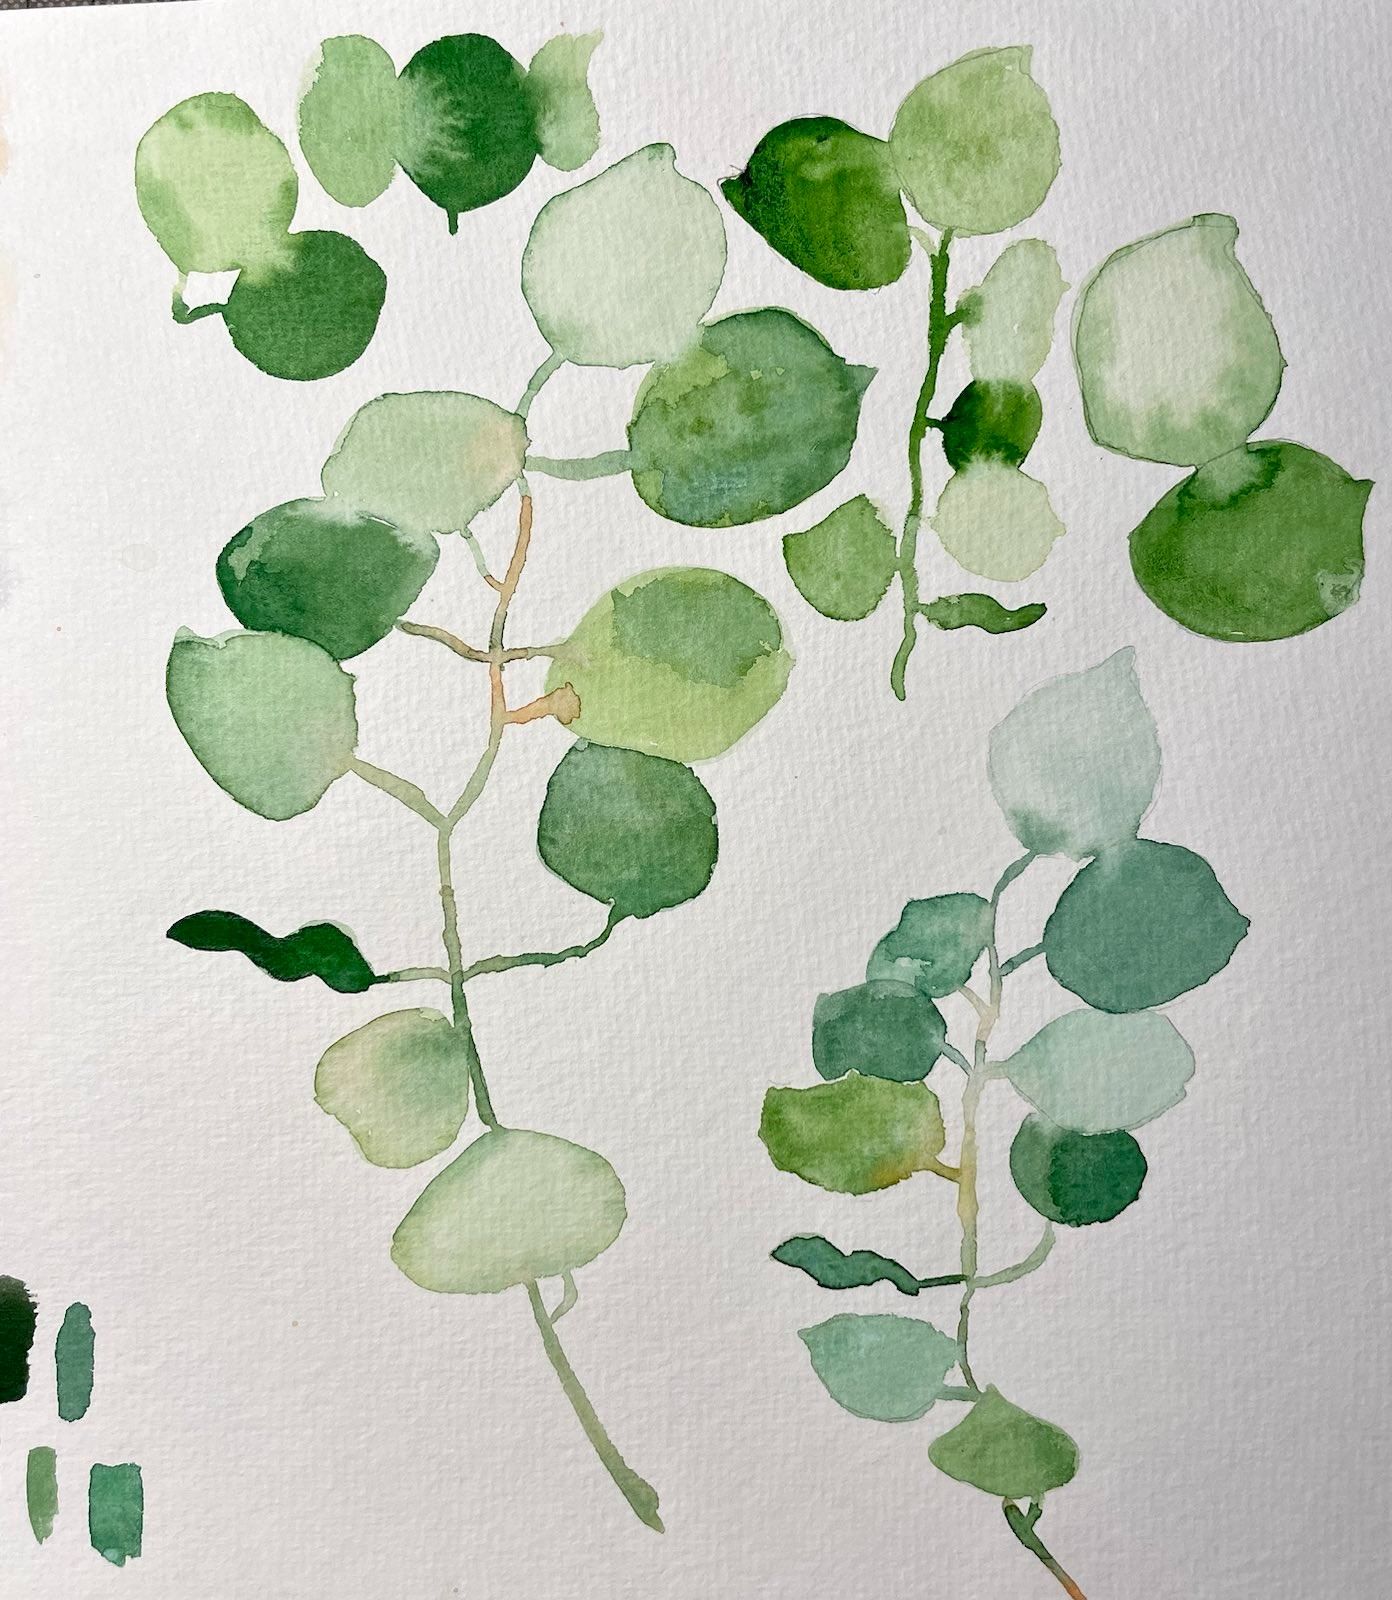 A watercolor painting of plants